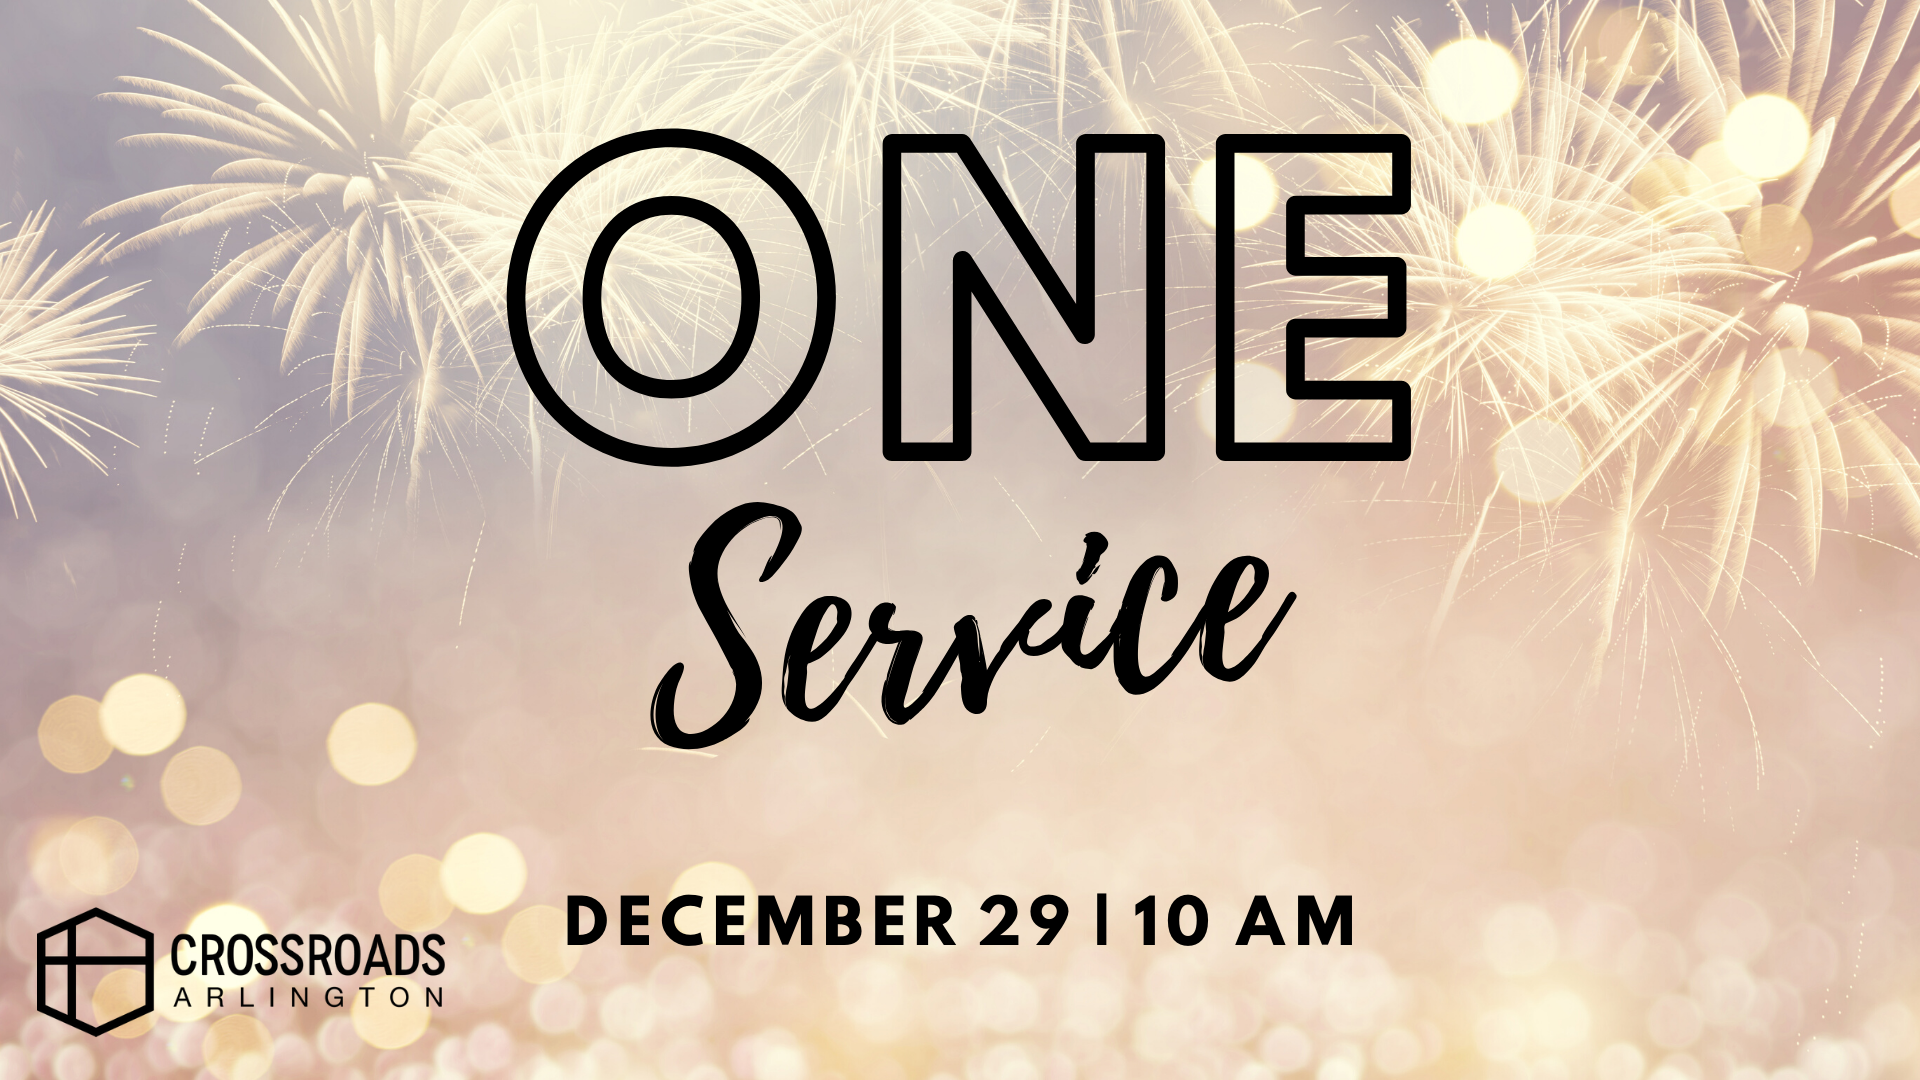 One Service

December 29th at 10 am